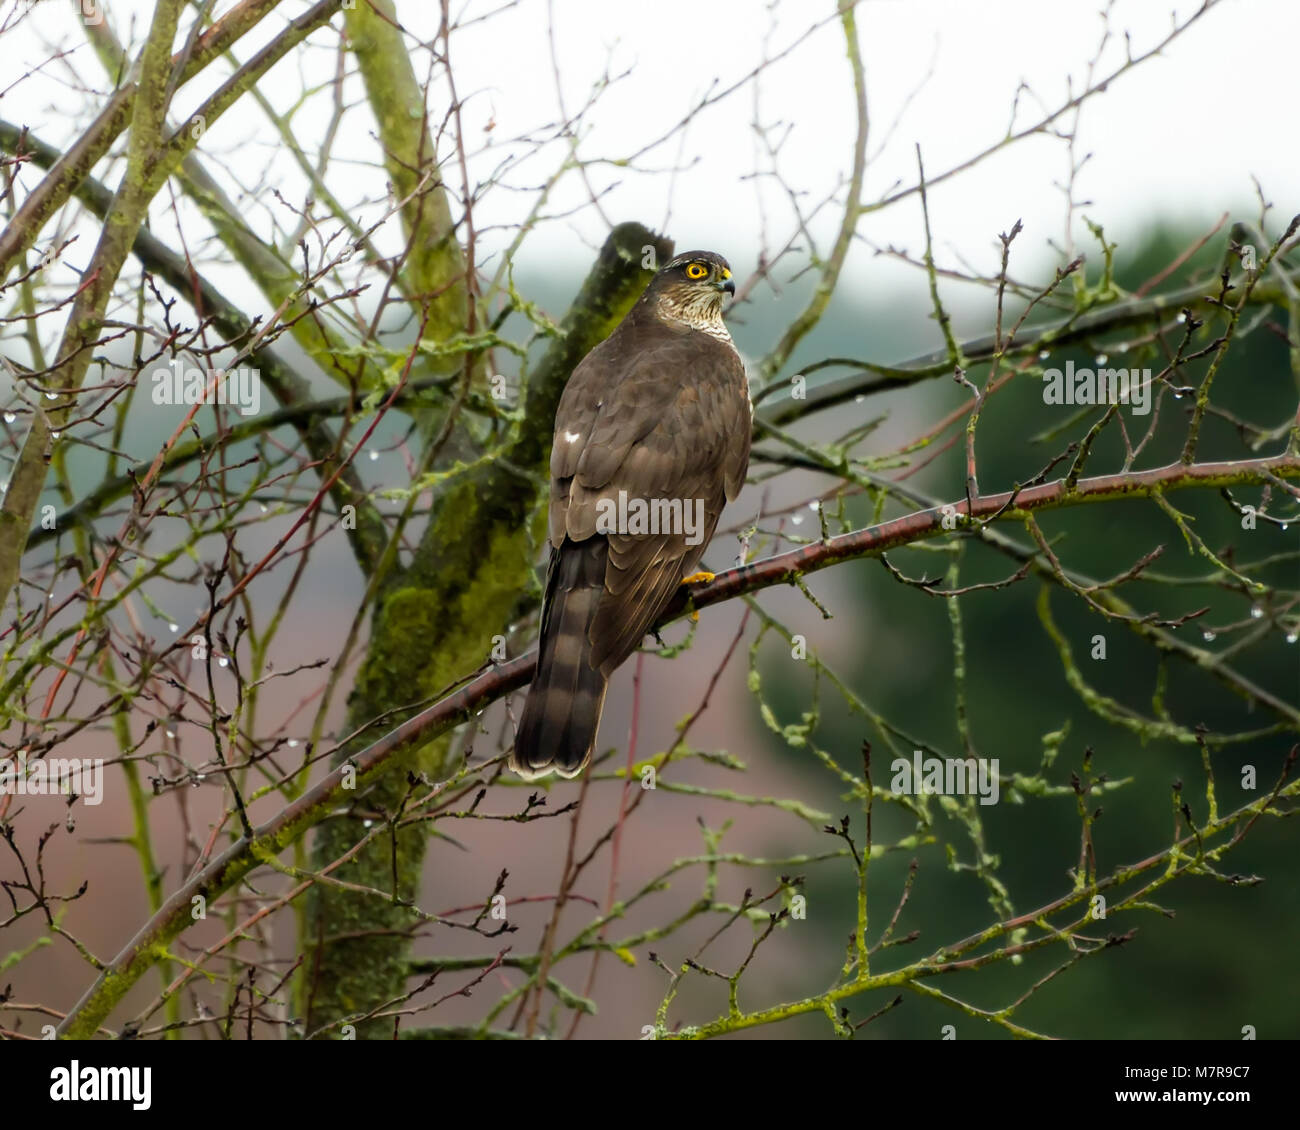 An eurasian sparrowhawk, Accipiter nisus, perched on a raised branch in a fruit tree in a garden waiting for the prey, birds, on a winter day, Germany Stock Photo